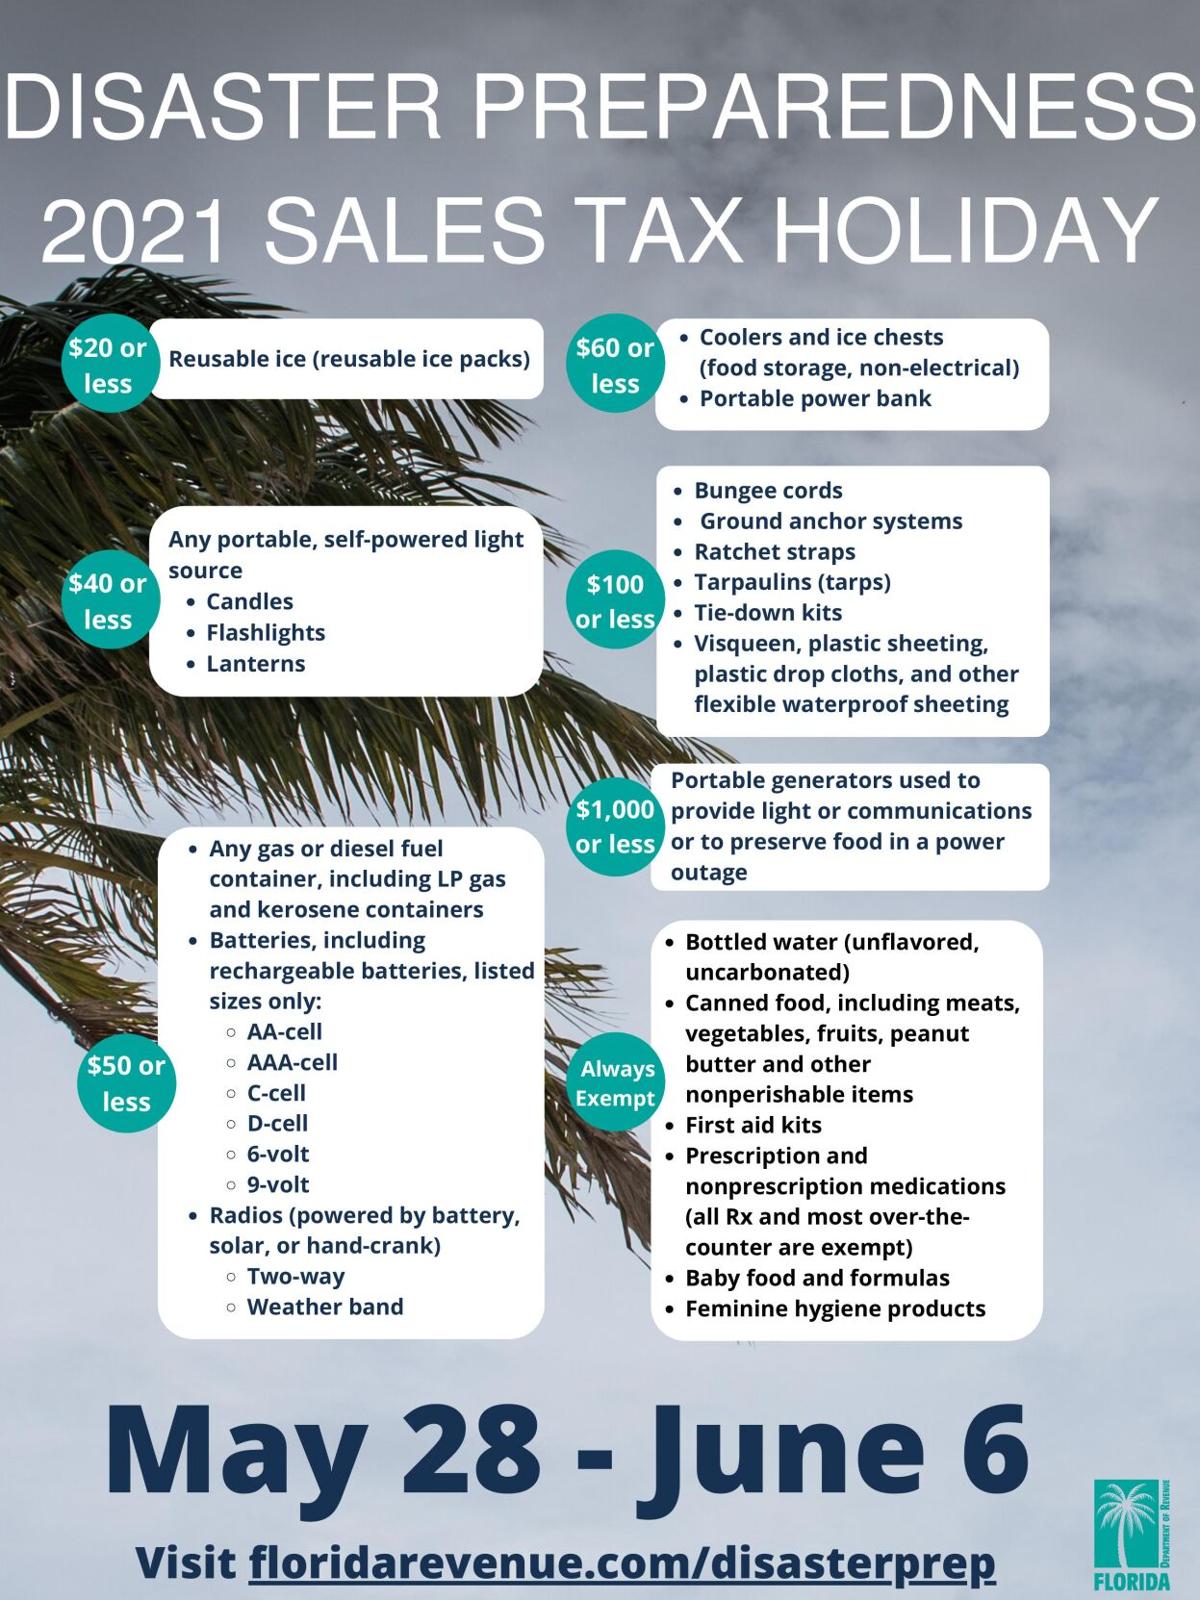 Disaster Preparedness Sales Tax Holiday Hurricane Guide